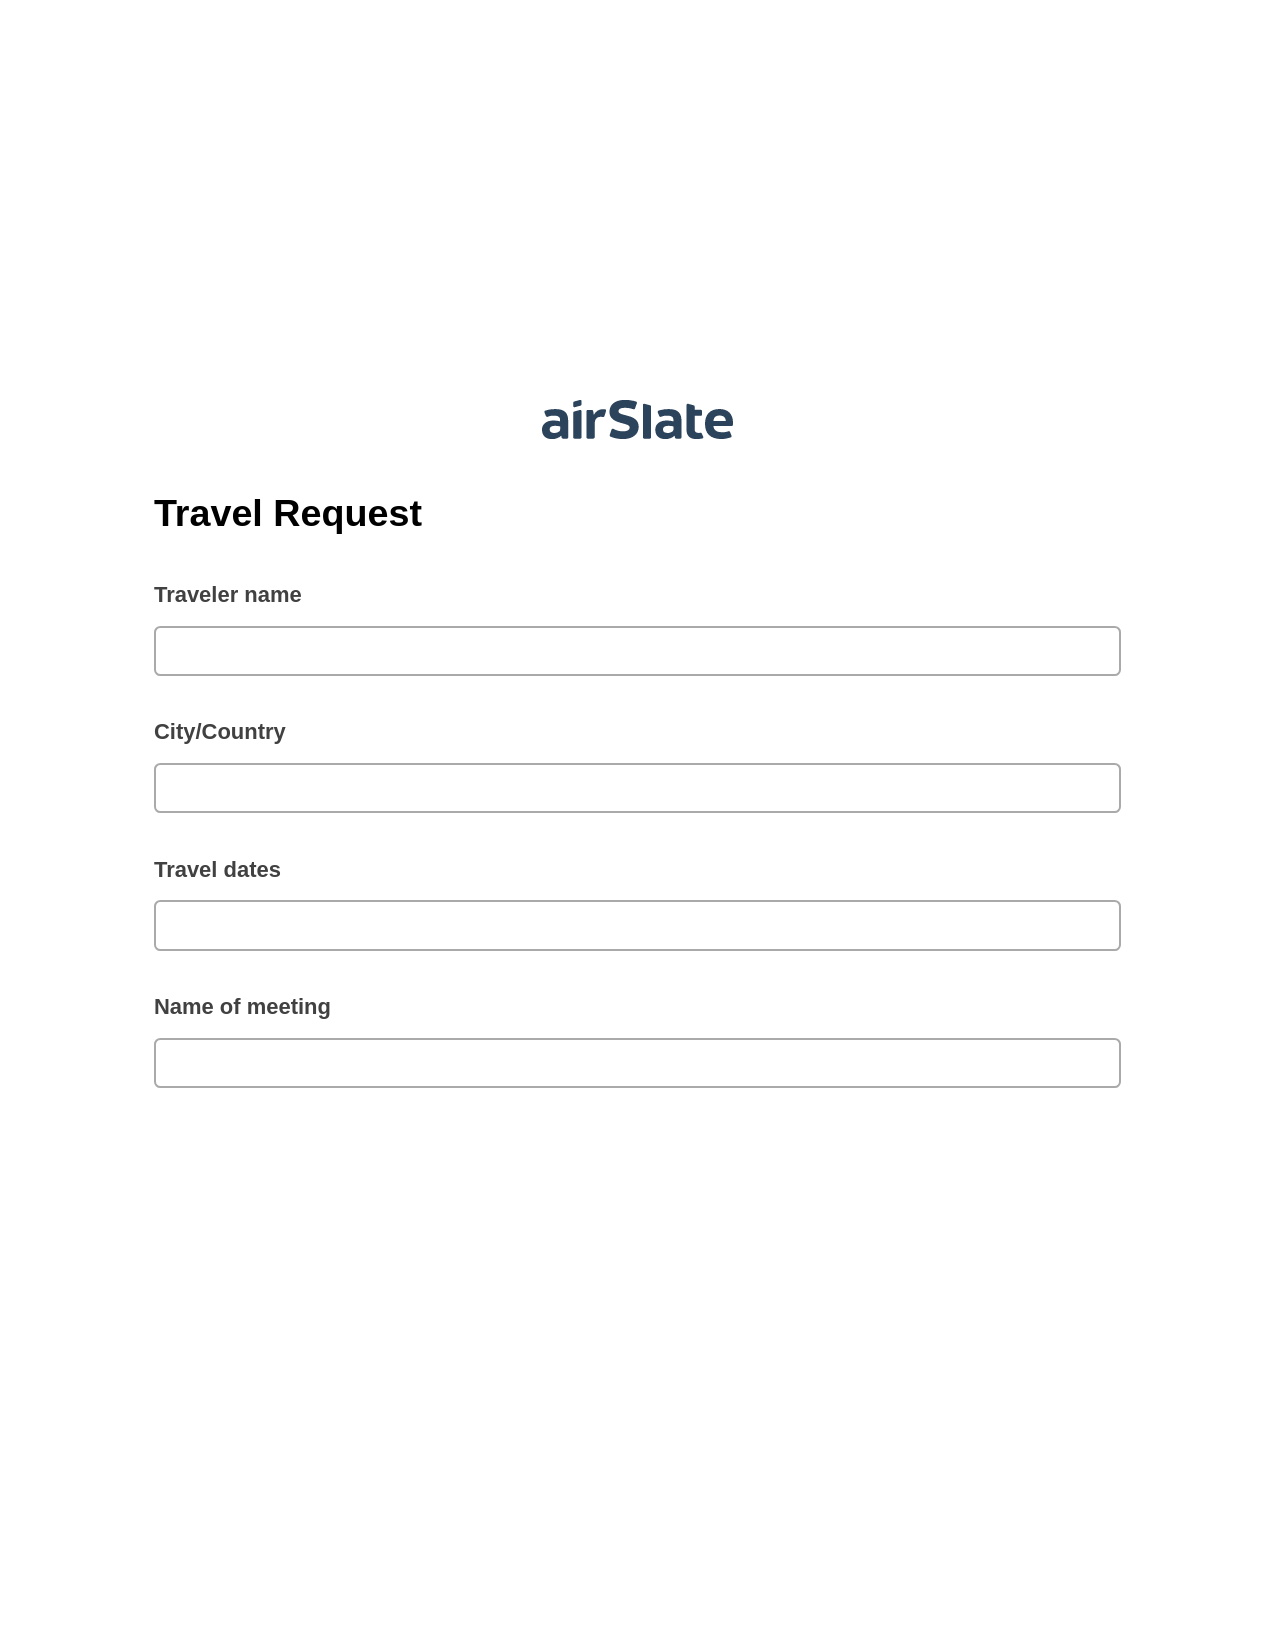 Travel Request Pre-fill Dropdown from Airtable, Create Slate Reminder Bot, Export to Smartsheet